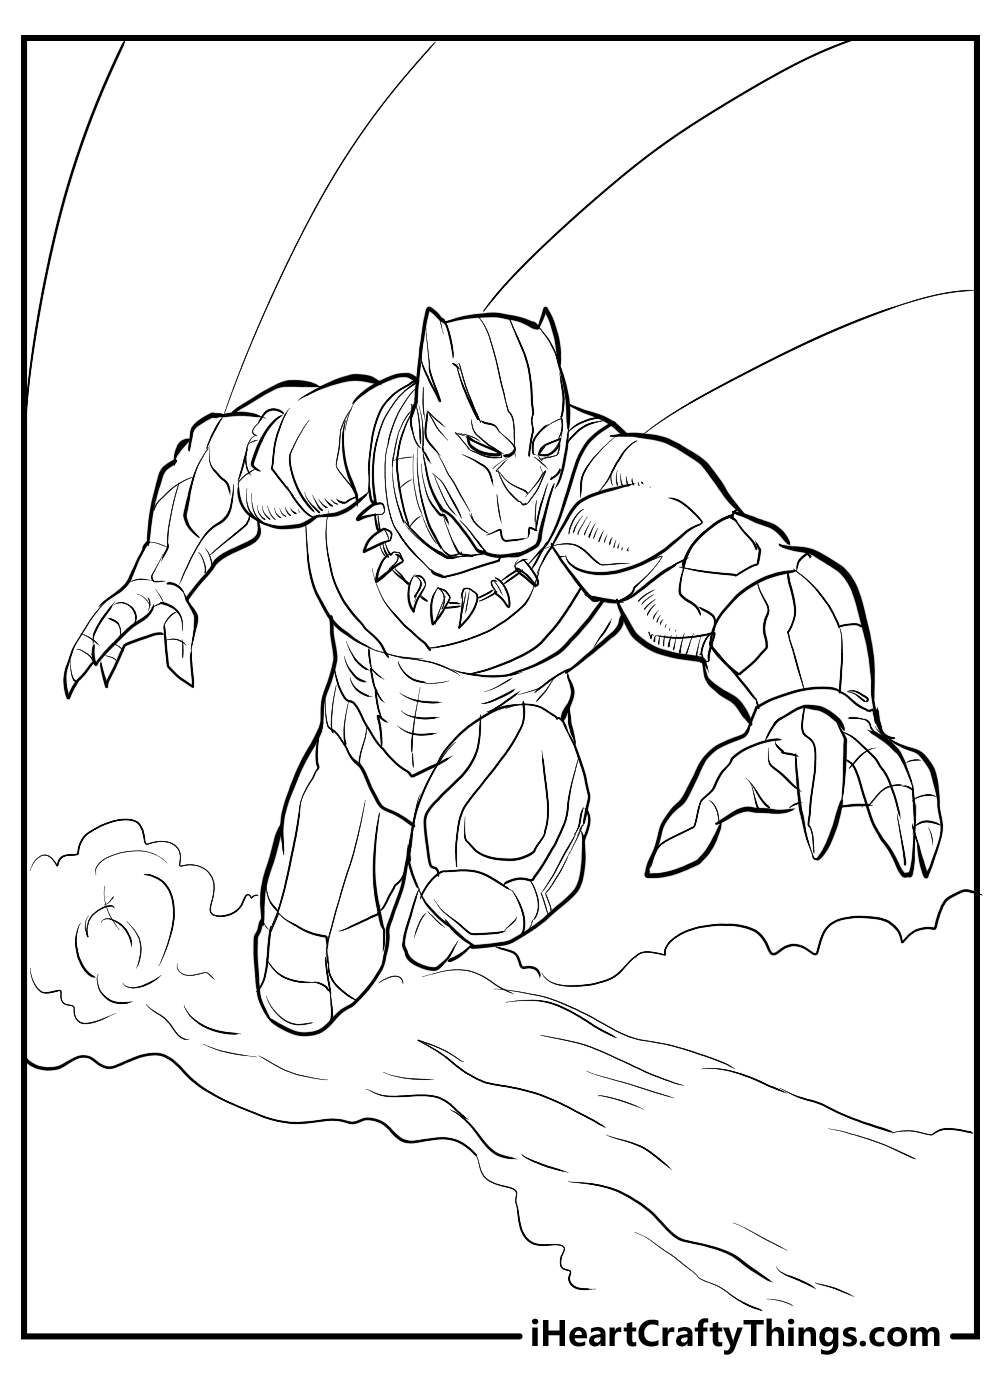 23+ Easy Black Panther Coloring Pages